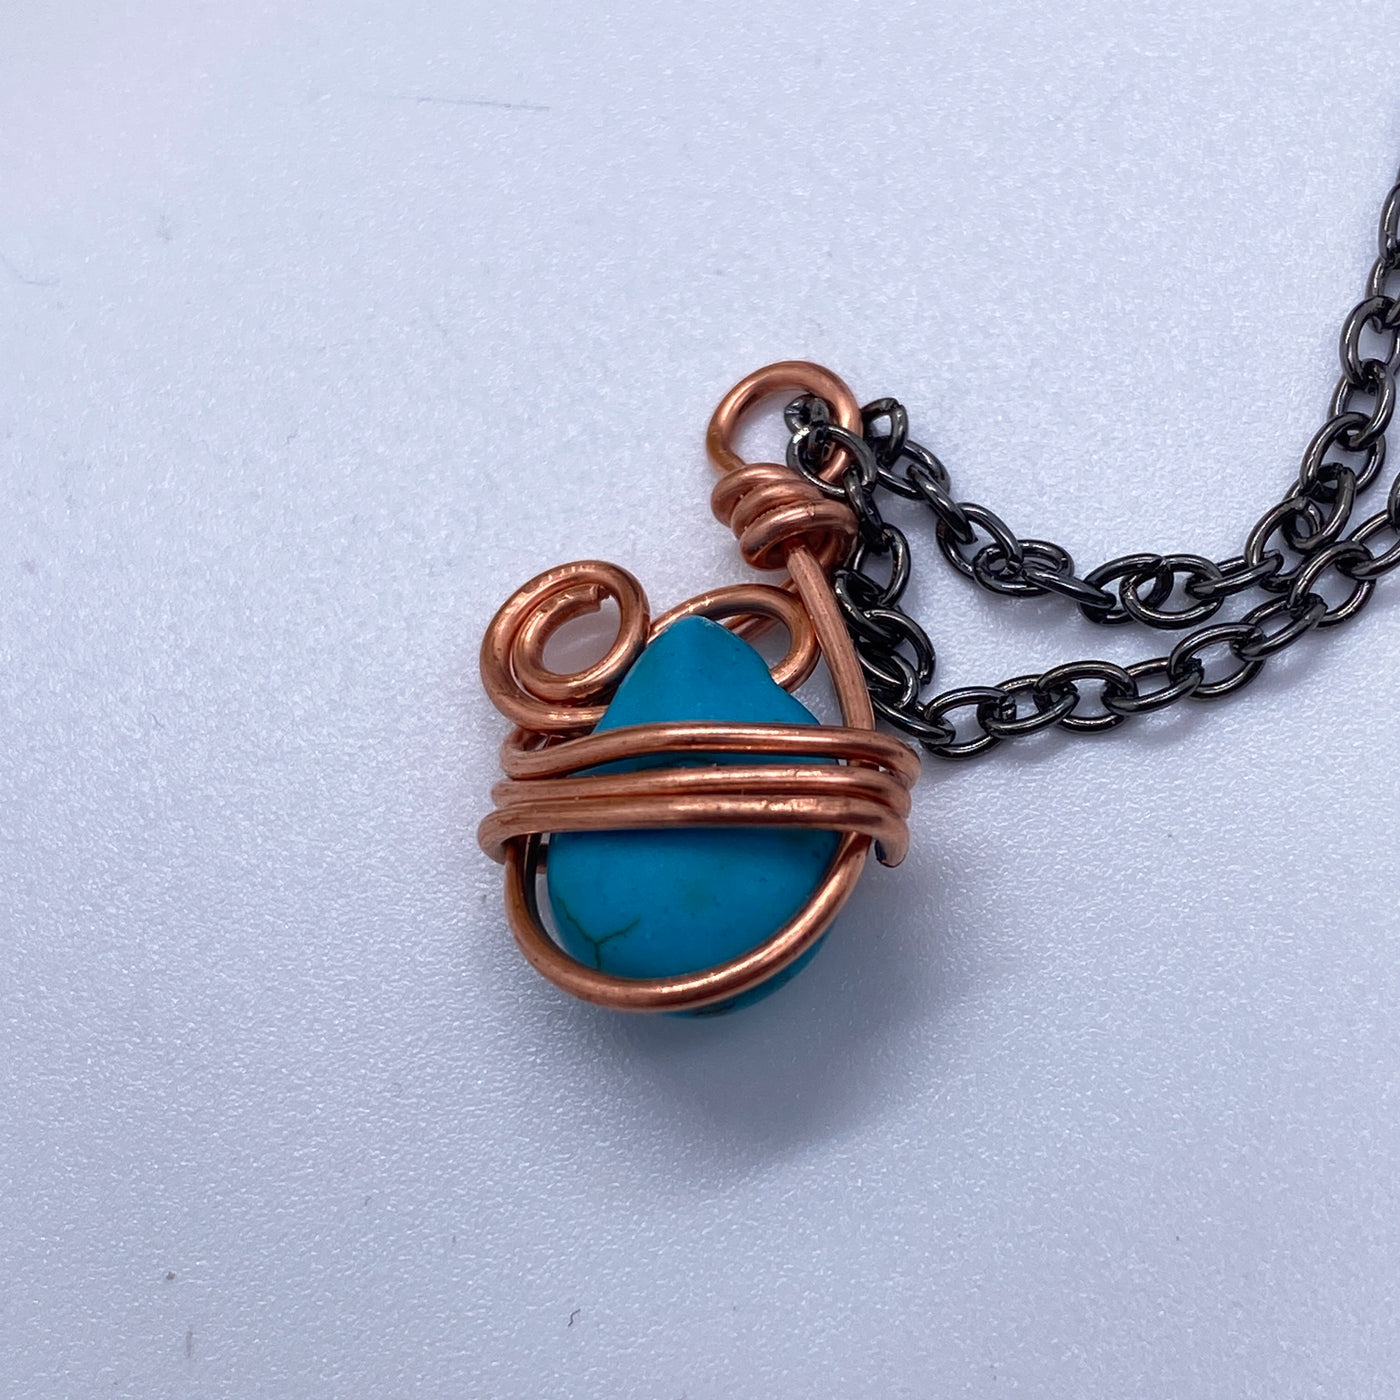 Wrapping wire on turquoise briolette